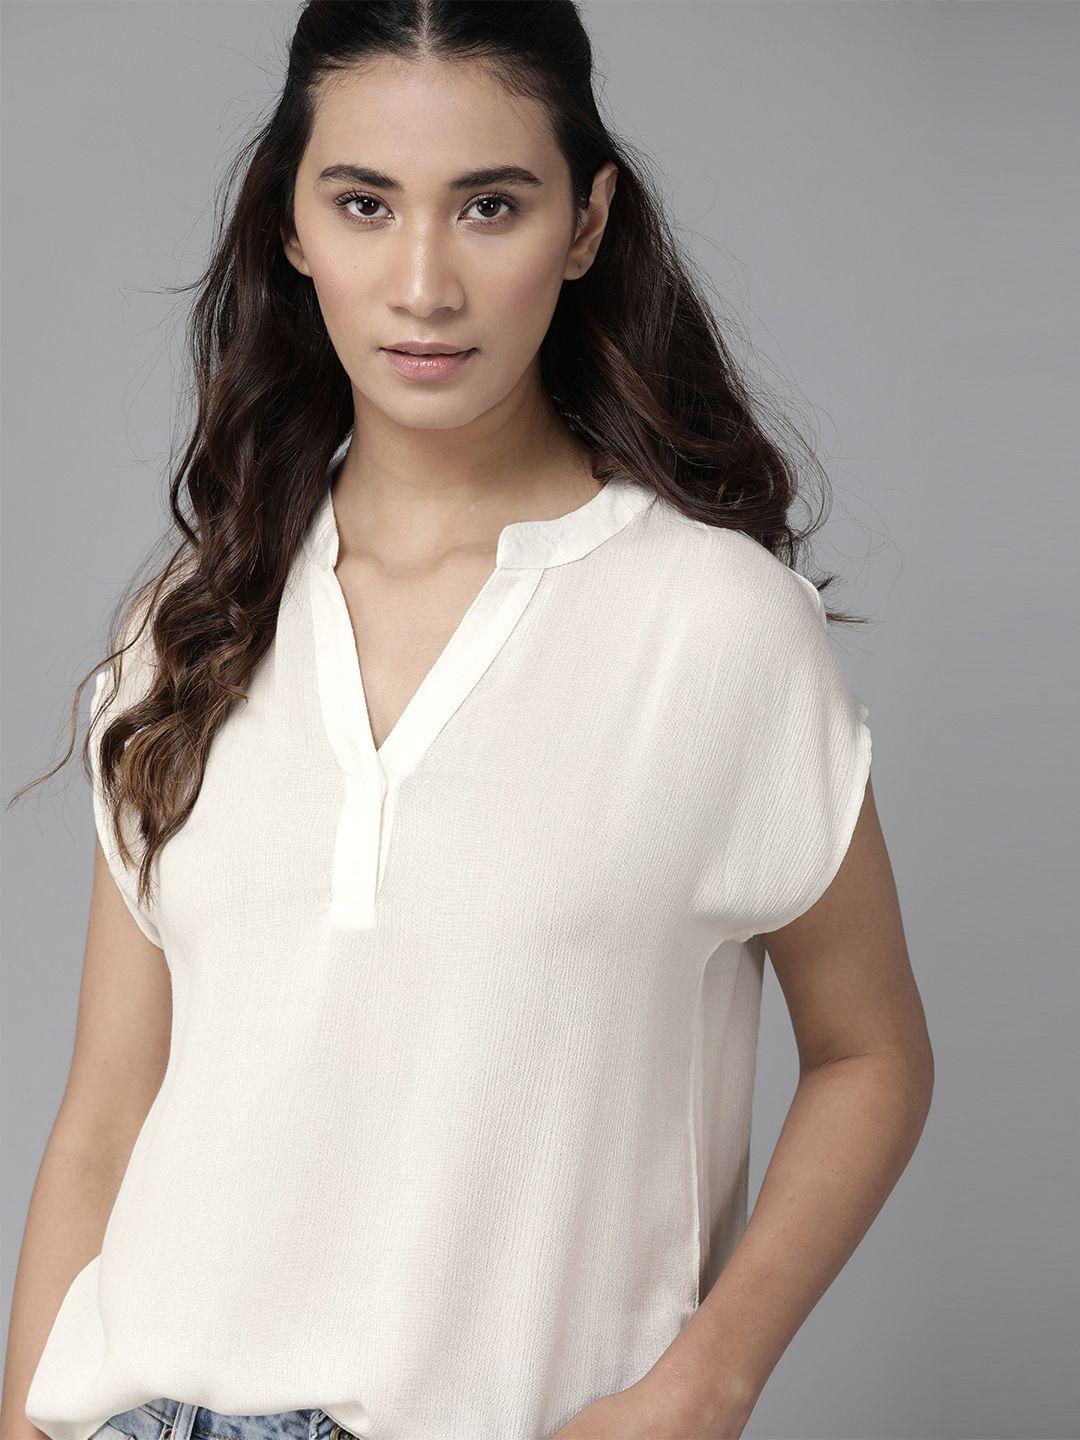 the roadster lifestyle co women off-white solid boxy top